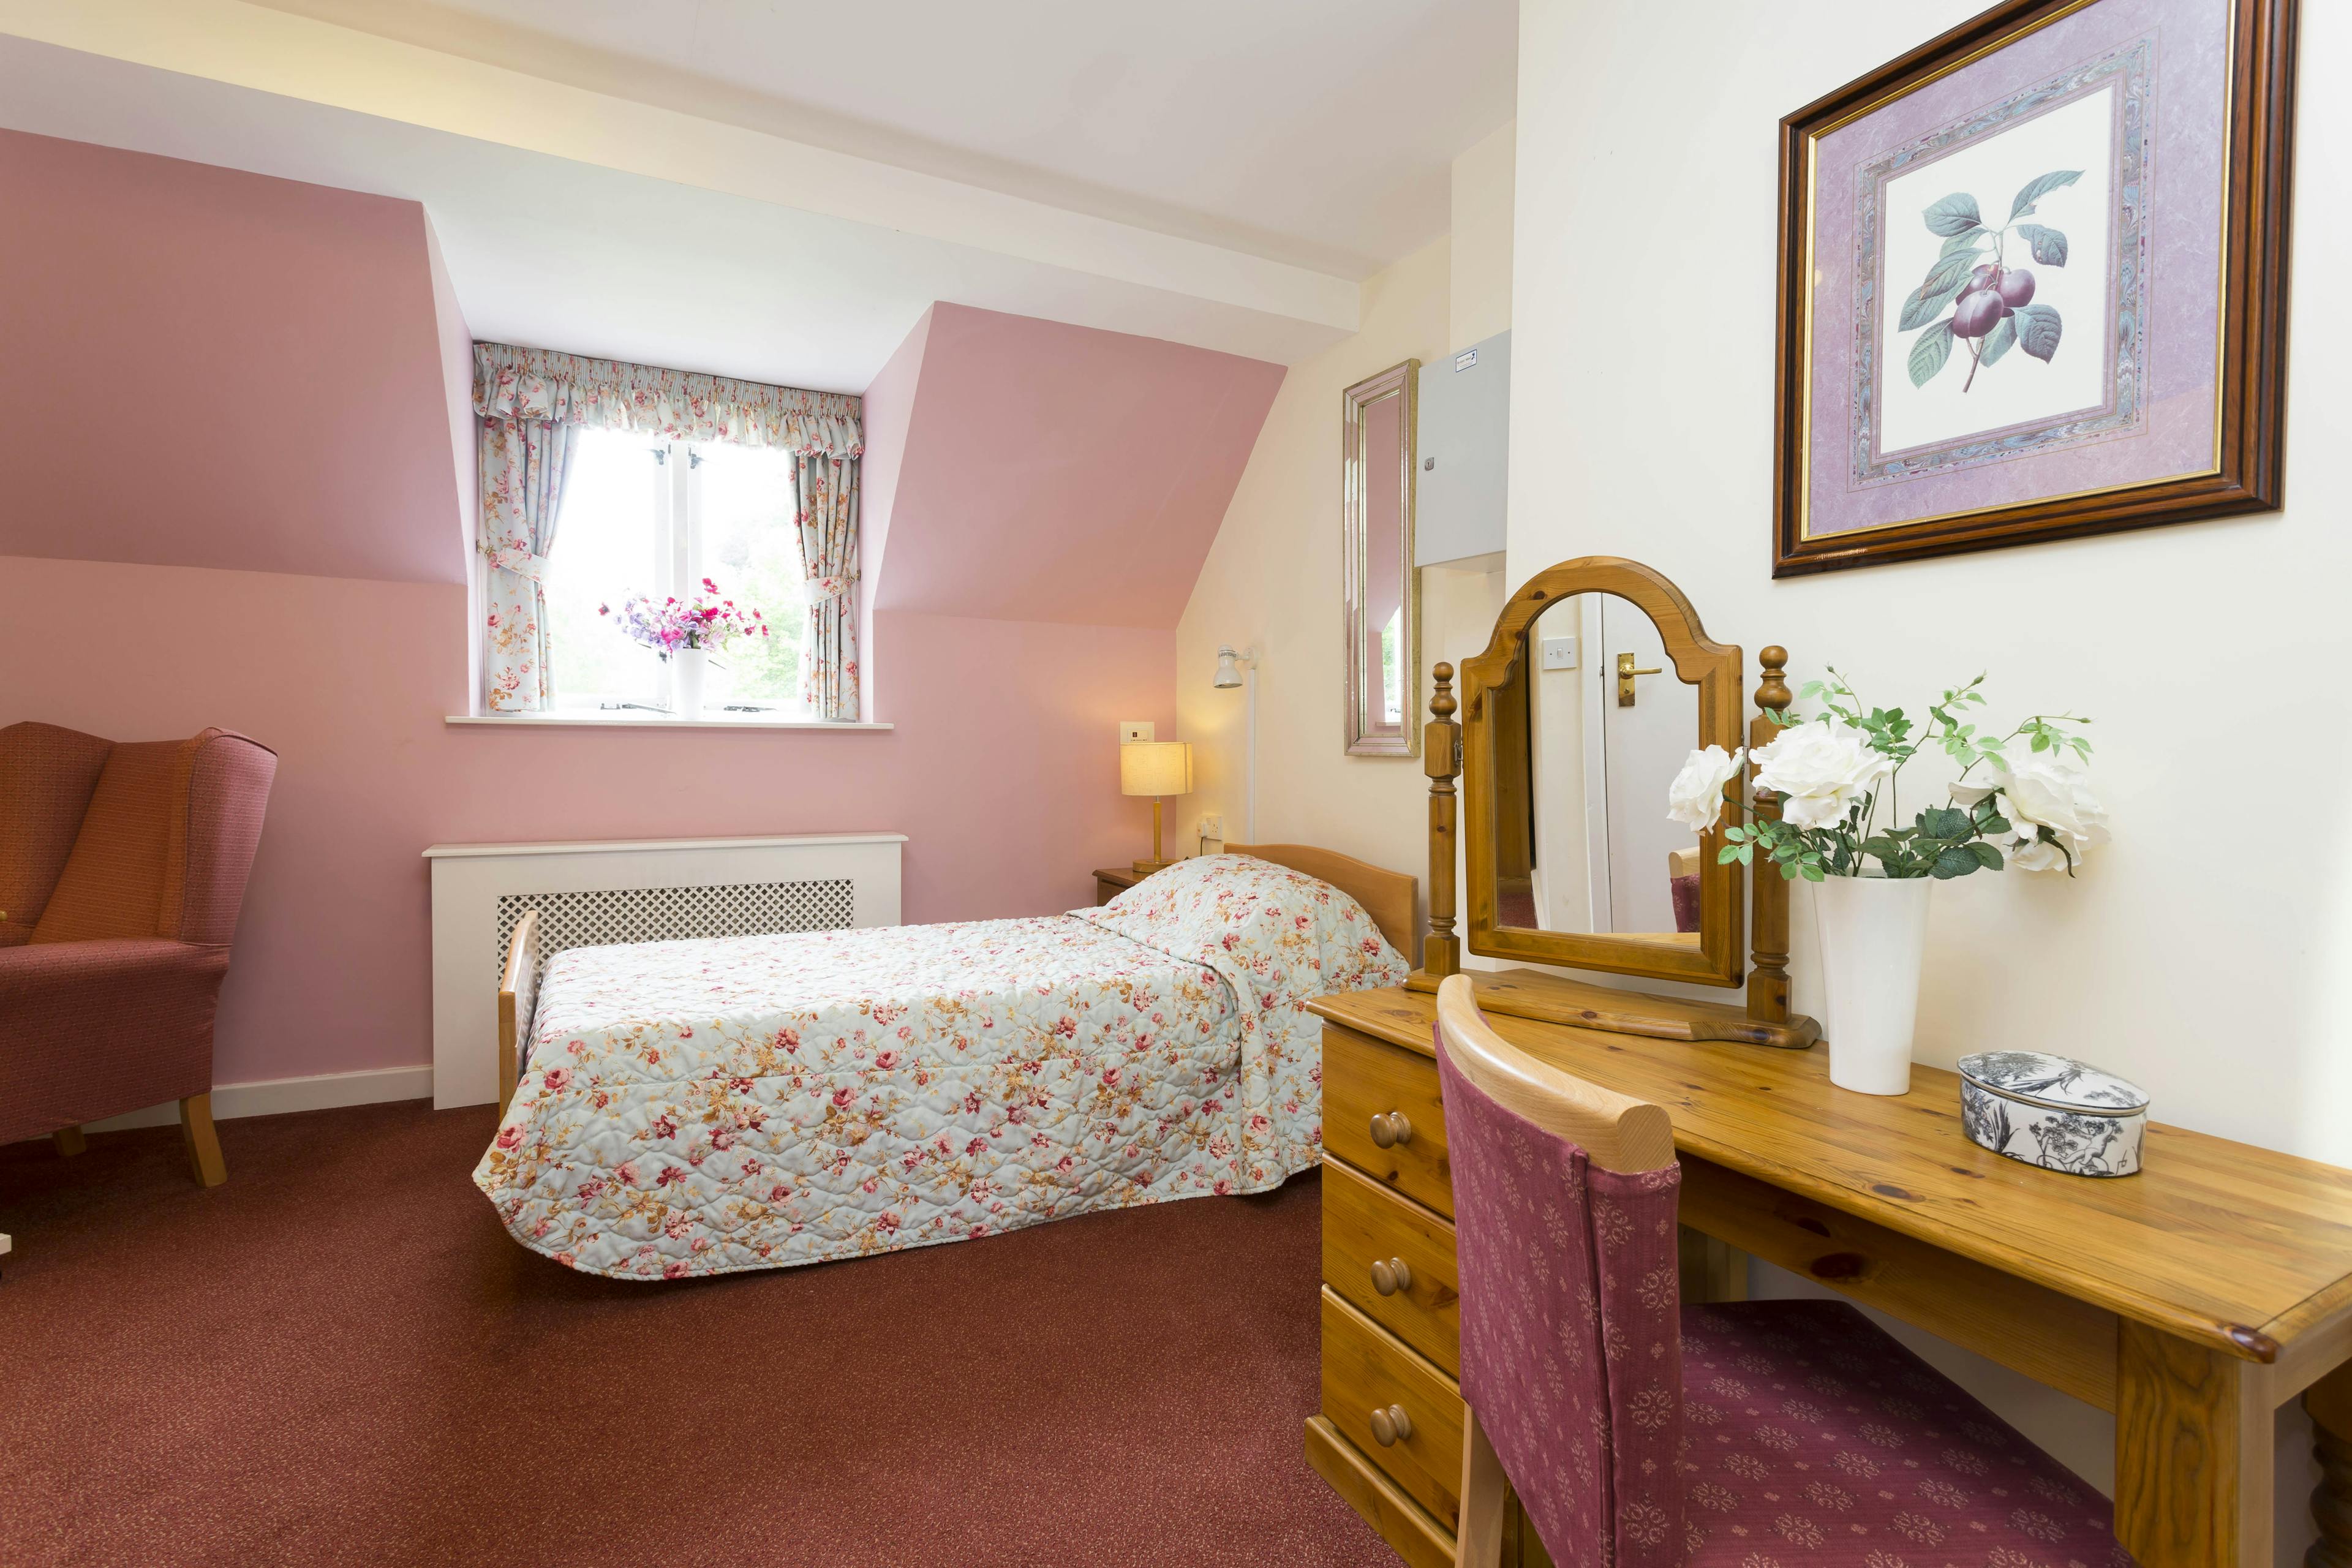 Bedroom at Prestbury Beaumont Care Home in Macclesfield, Cheshire